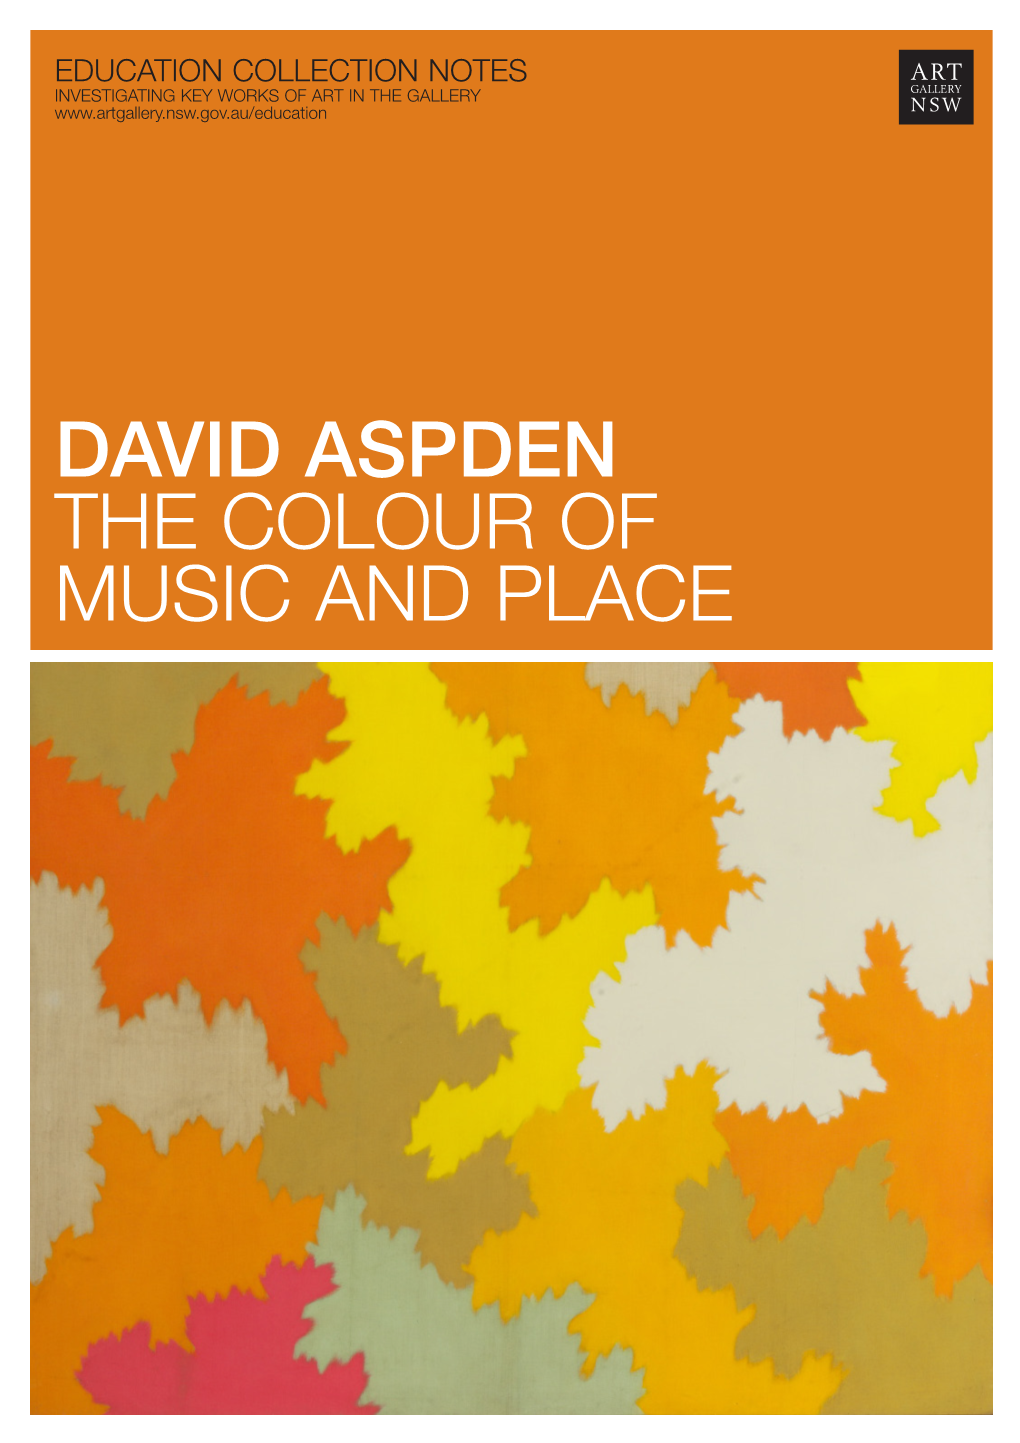 David Aspden the Colour of Music and Place